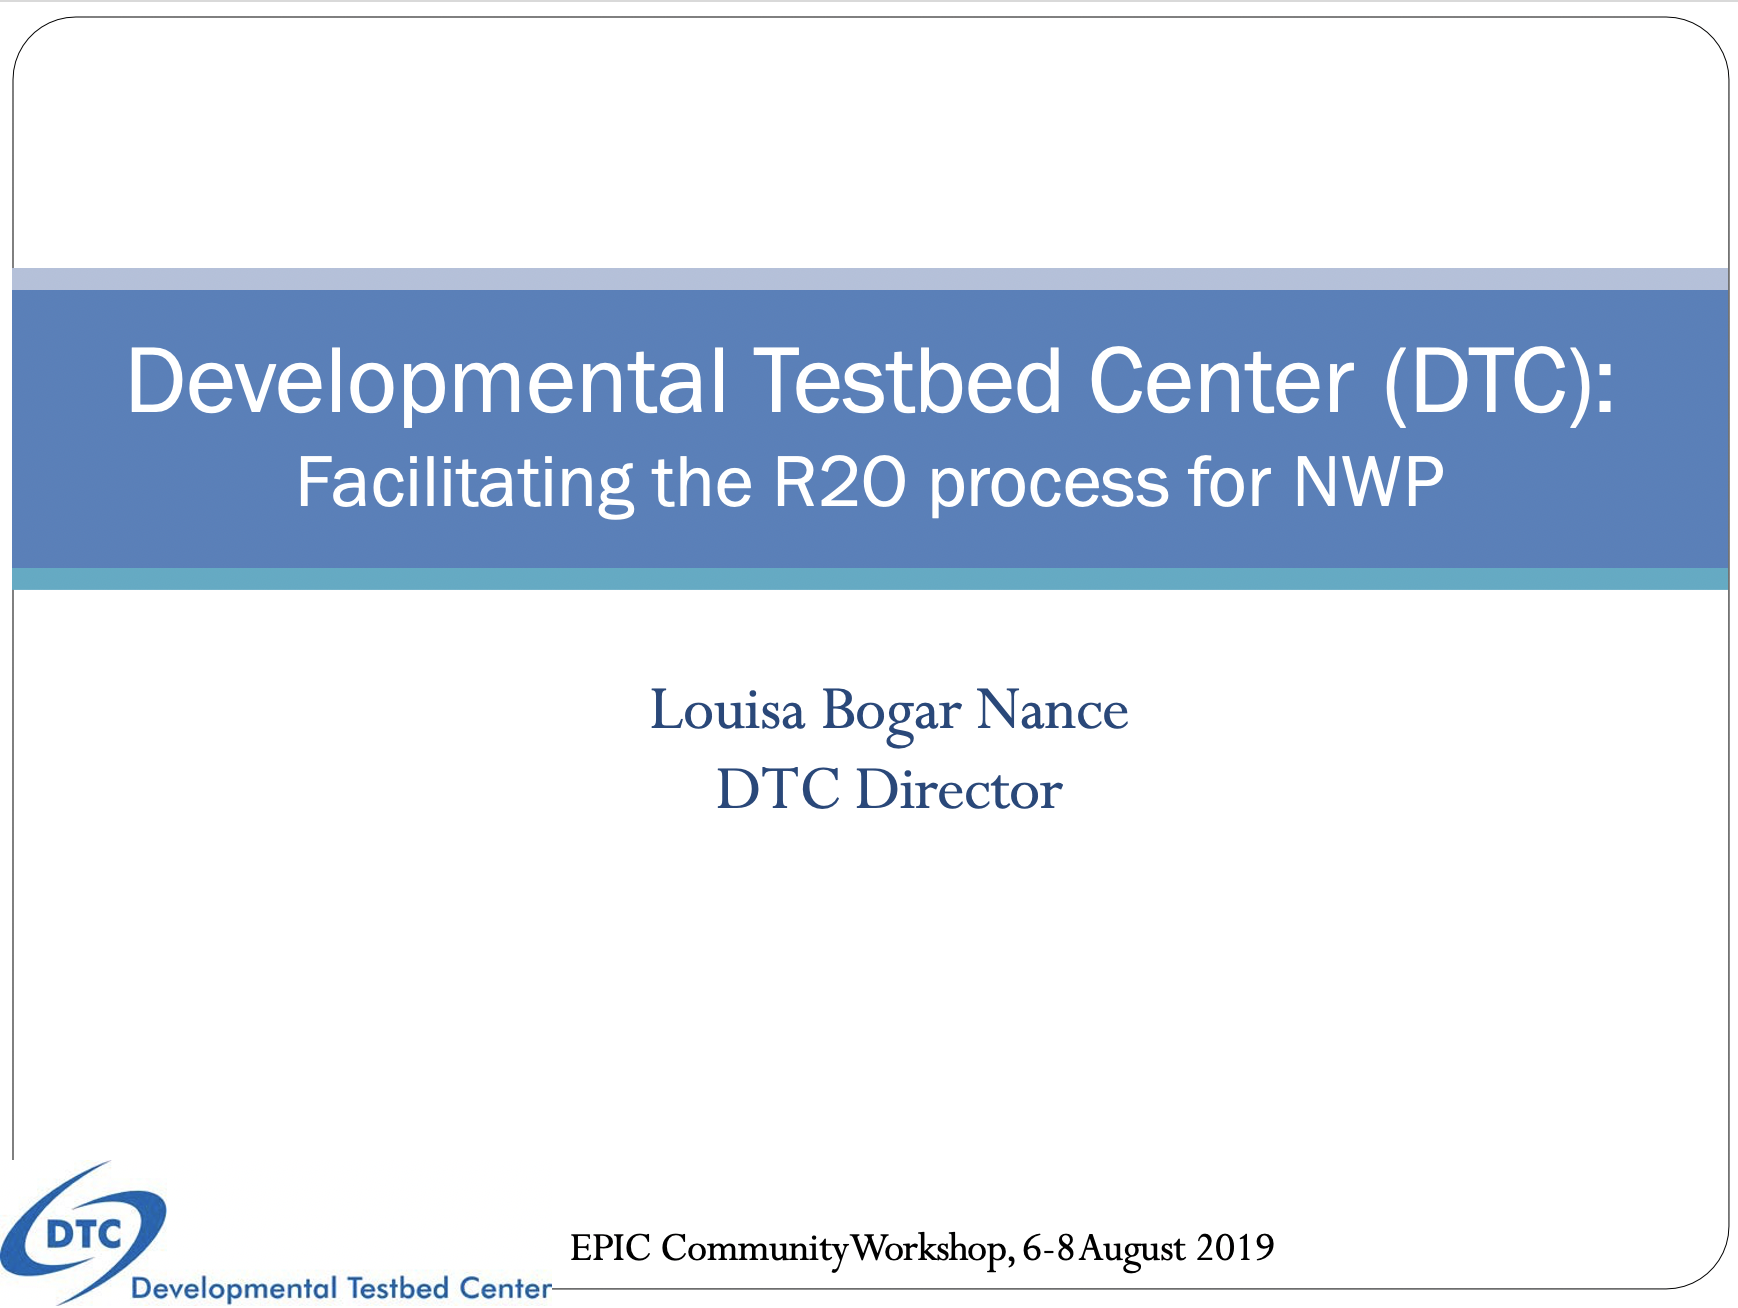 Developmental Testbed Center (DTC): Facilitating the R2O process for NWP